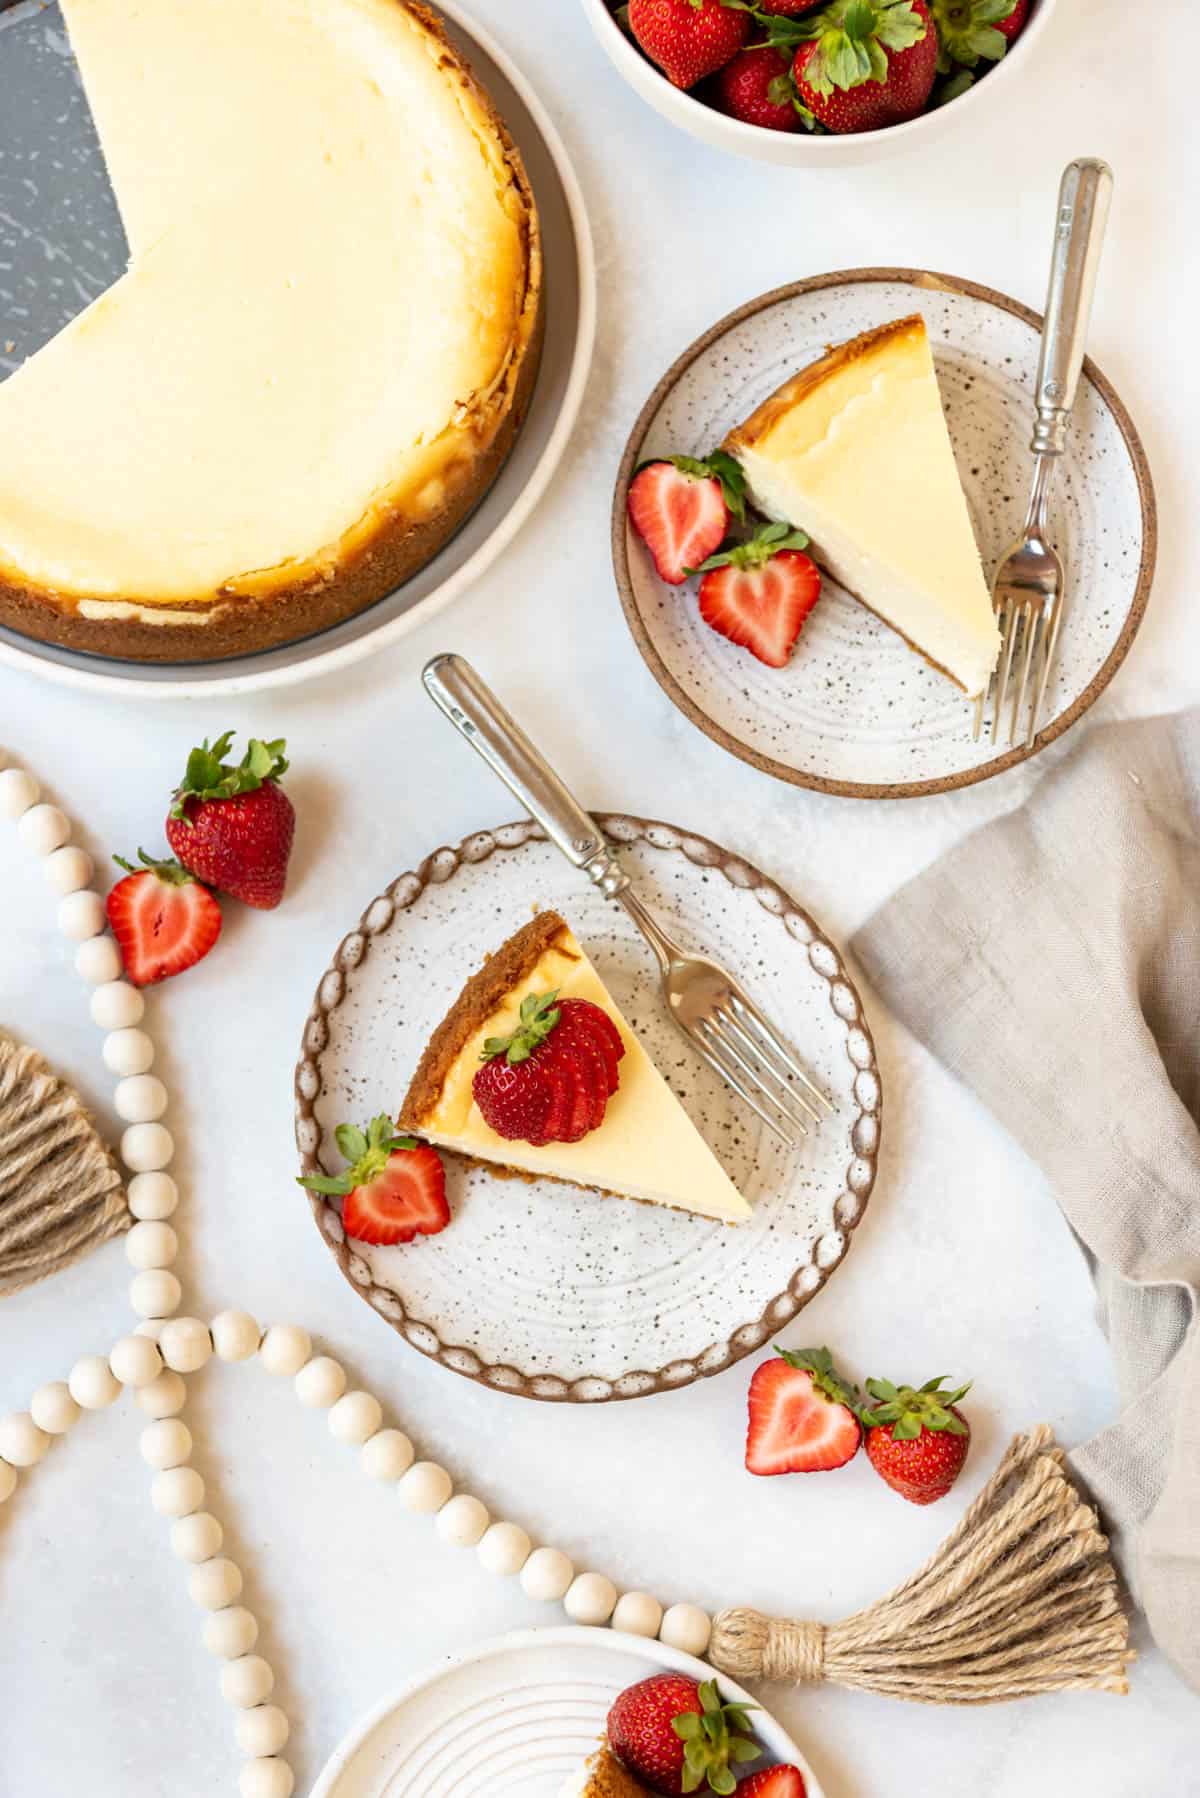 Top view of cheesecake with sliced strawberries on top, laid out on a table on plates with cutlery. 